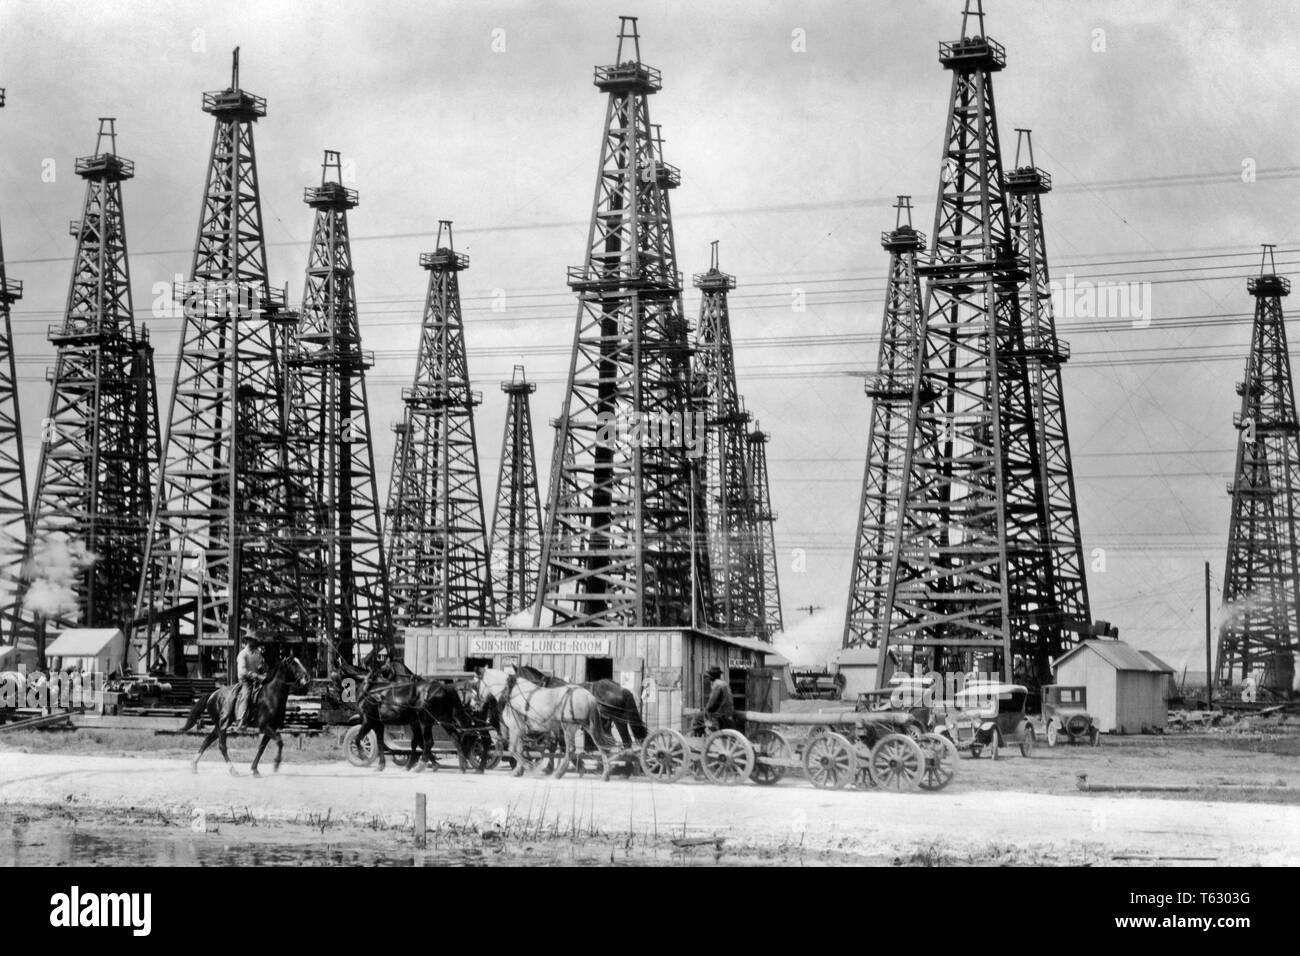 1900s SPINDLETOP HILL OIL FIELD CIRCA 1903 OIL DERRICKS AND LUNCH ROOM PEDESTRIANS WORKERS HORSES WAGONS BEAUMONT TEXAS USA - q74960 CPC001 HARS CONCEPTUAL PORTION WAGONS LOCATED BOOMTOWN GULF COAST BEAUMONT CIRCA SPINDLETOP BLACK AND WHITE DERRICKS OIL FIELD OLD FASHIONED Stock Photo